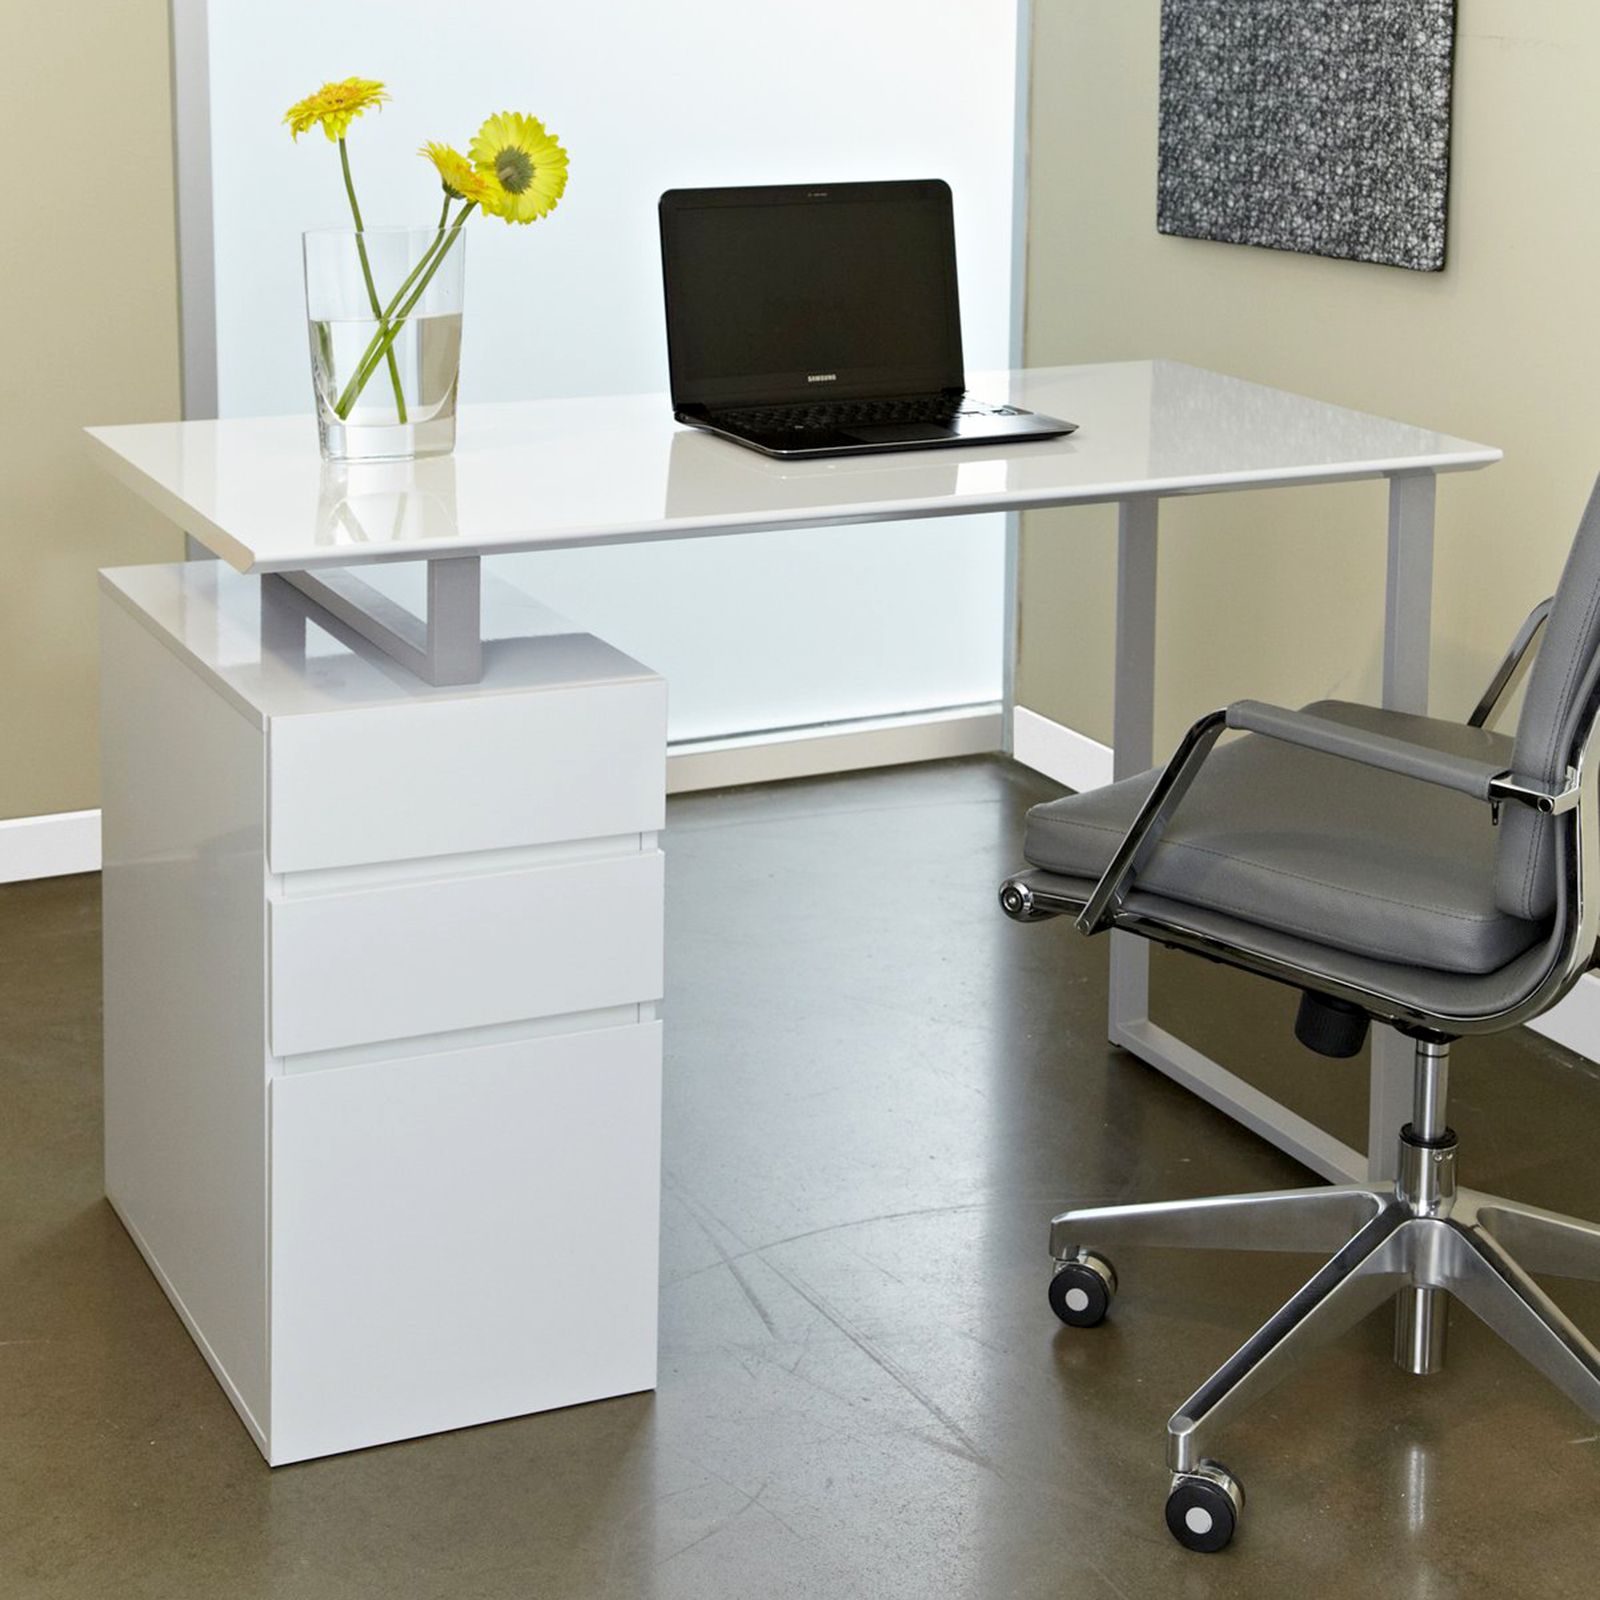 Tribeca Study Desk With Drawers – Desks At Hayneedle For White Finish Office Study Work Desks (View 5 of 15)